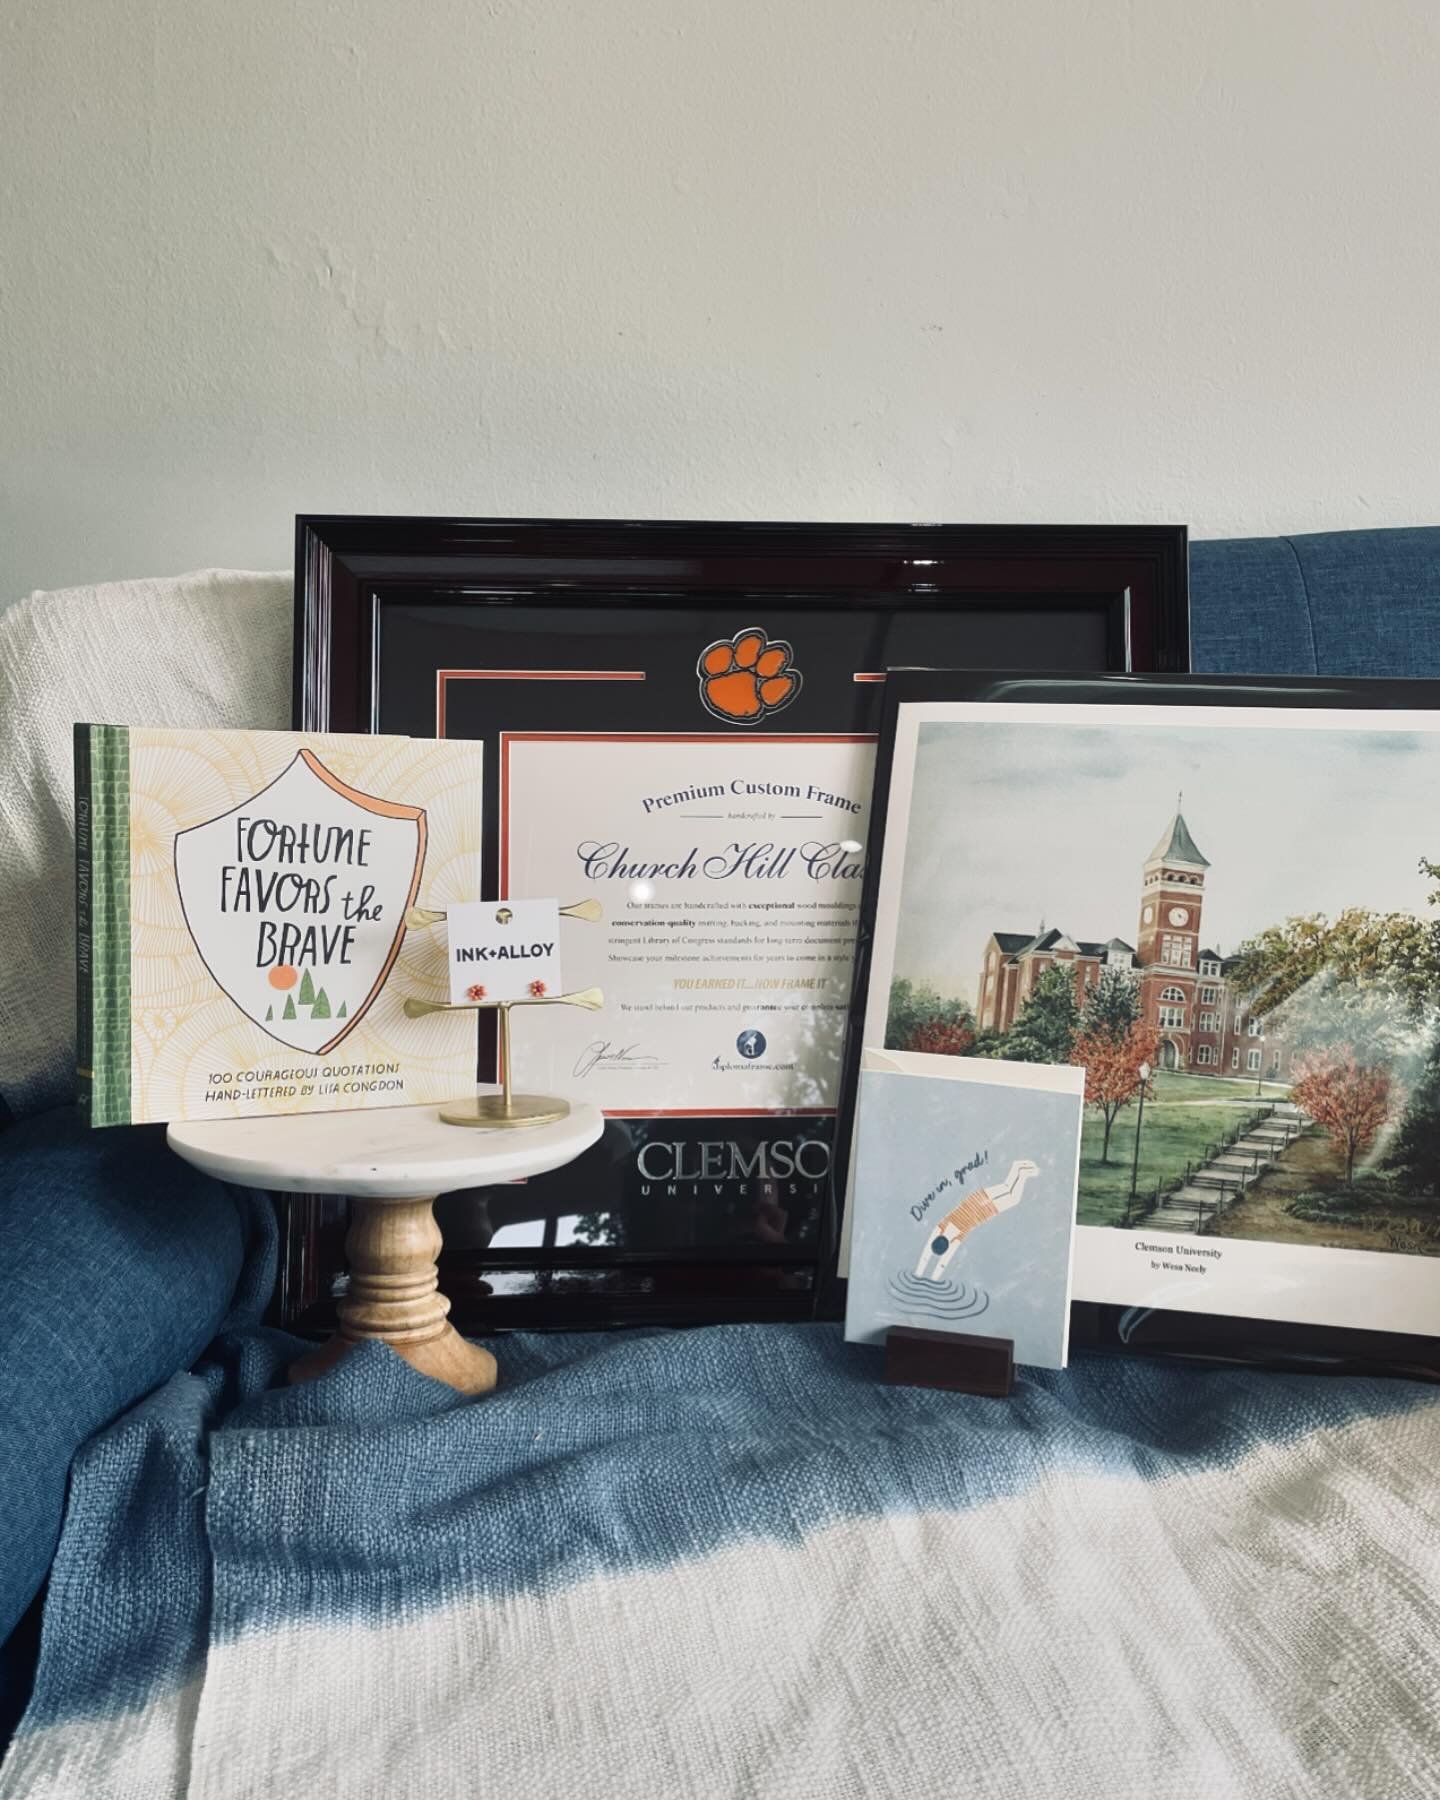 Congrats to all of the @clemsonuniversity graduates this week!
We have gifts for grads, ready-made and custom diploma frames, plus Clemson artwork by local artists!

Come shop with us in your school spirit gear and receive 10% off any retail purchase